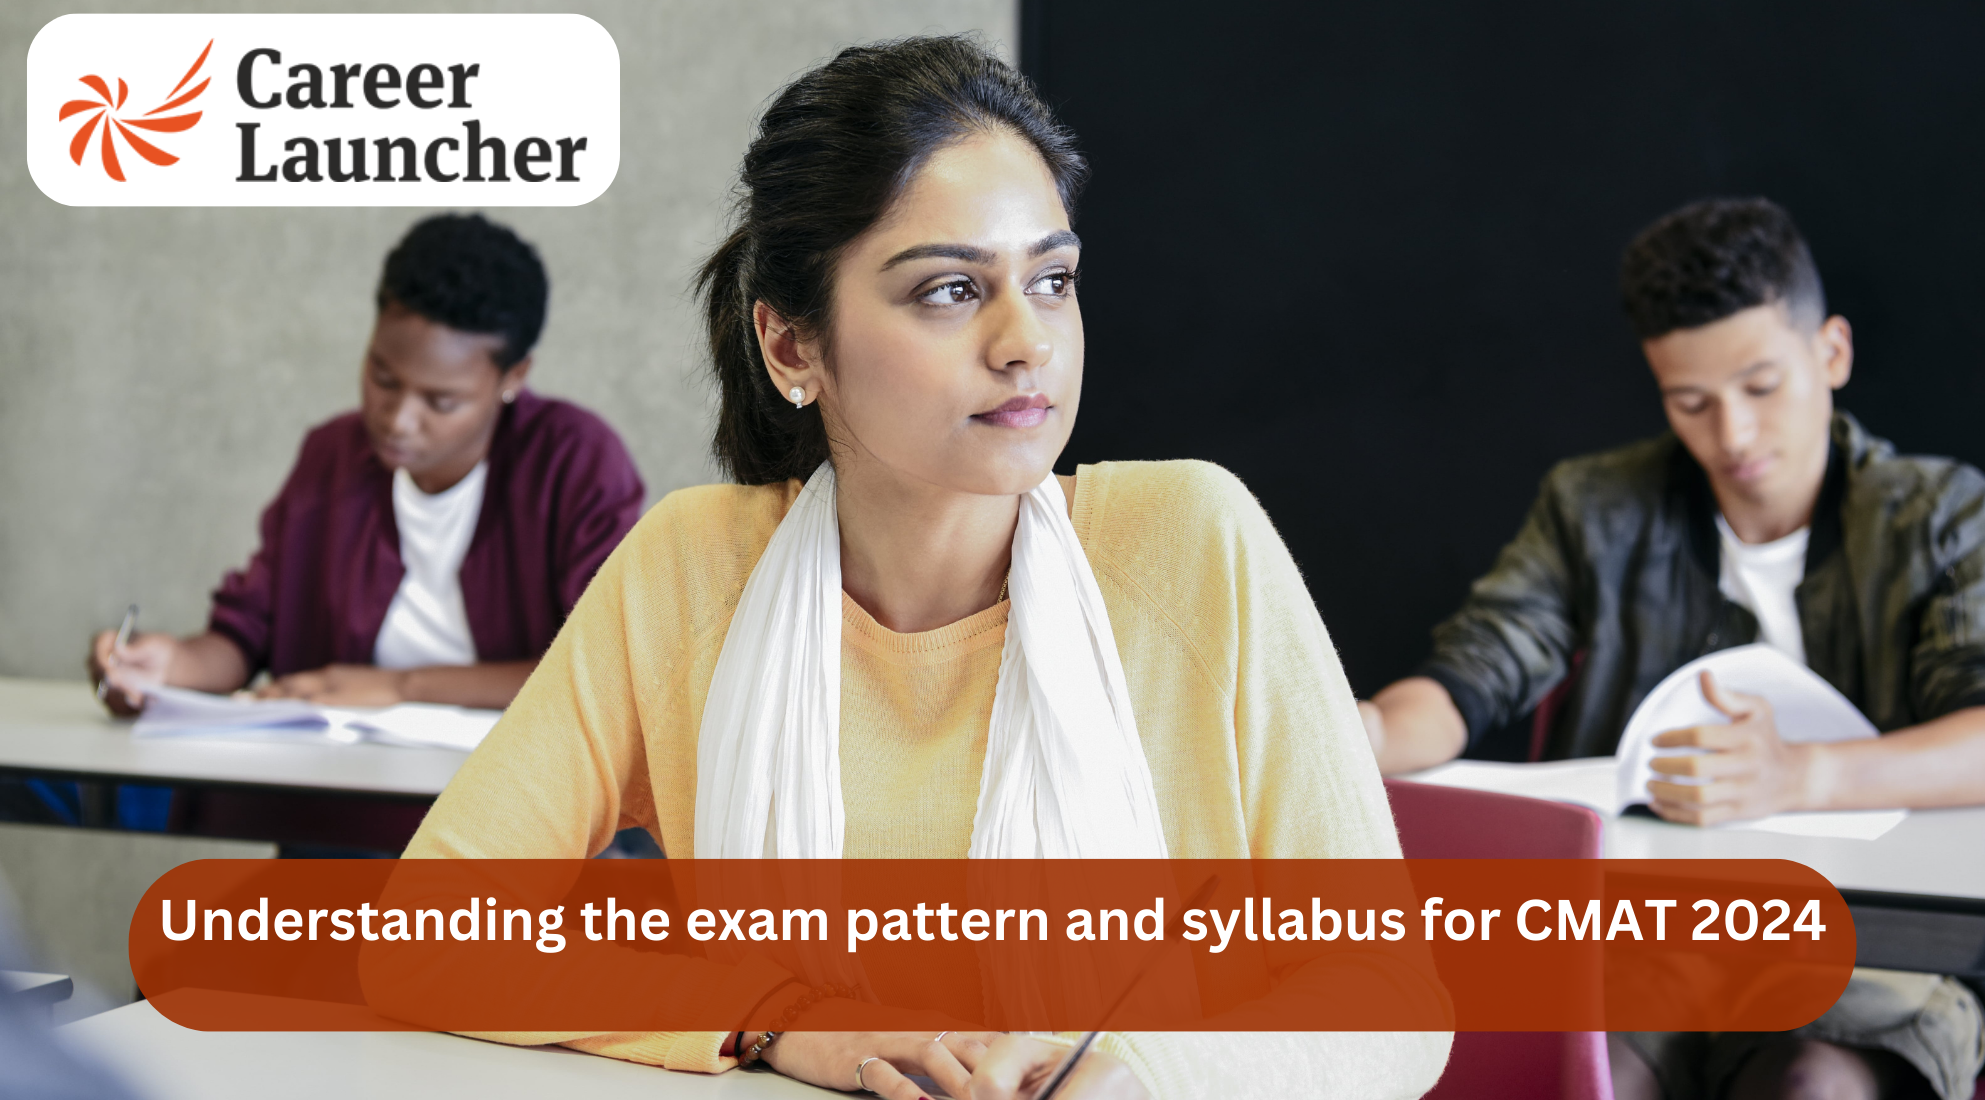 Understanding the exam pattern and syllabus for CMAT 2024